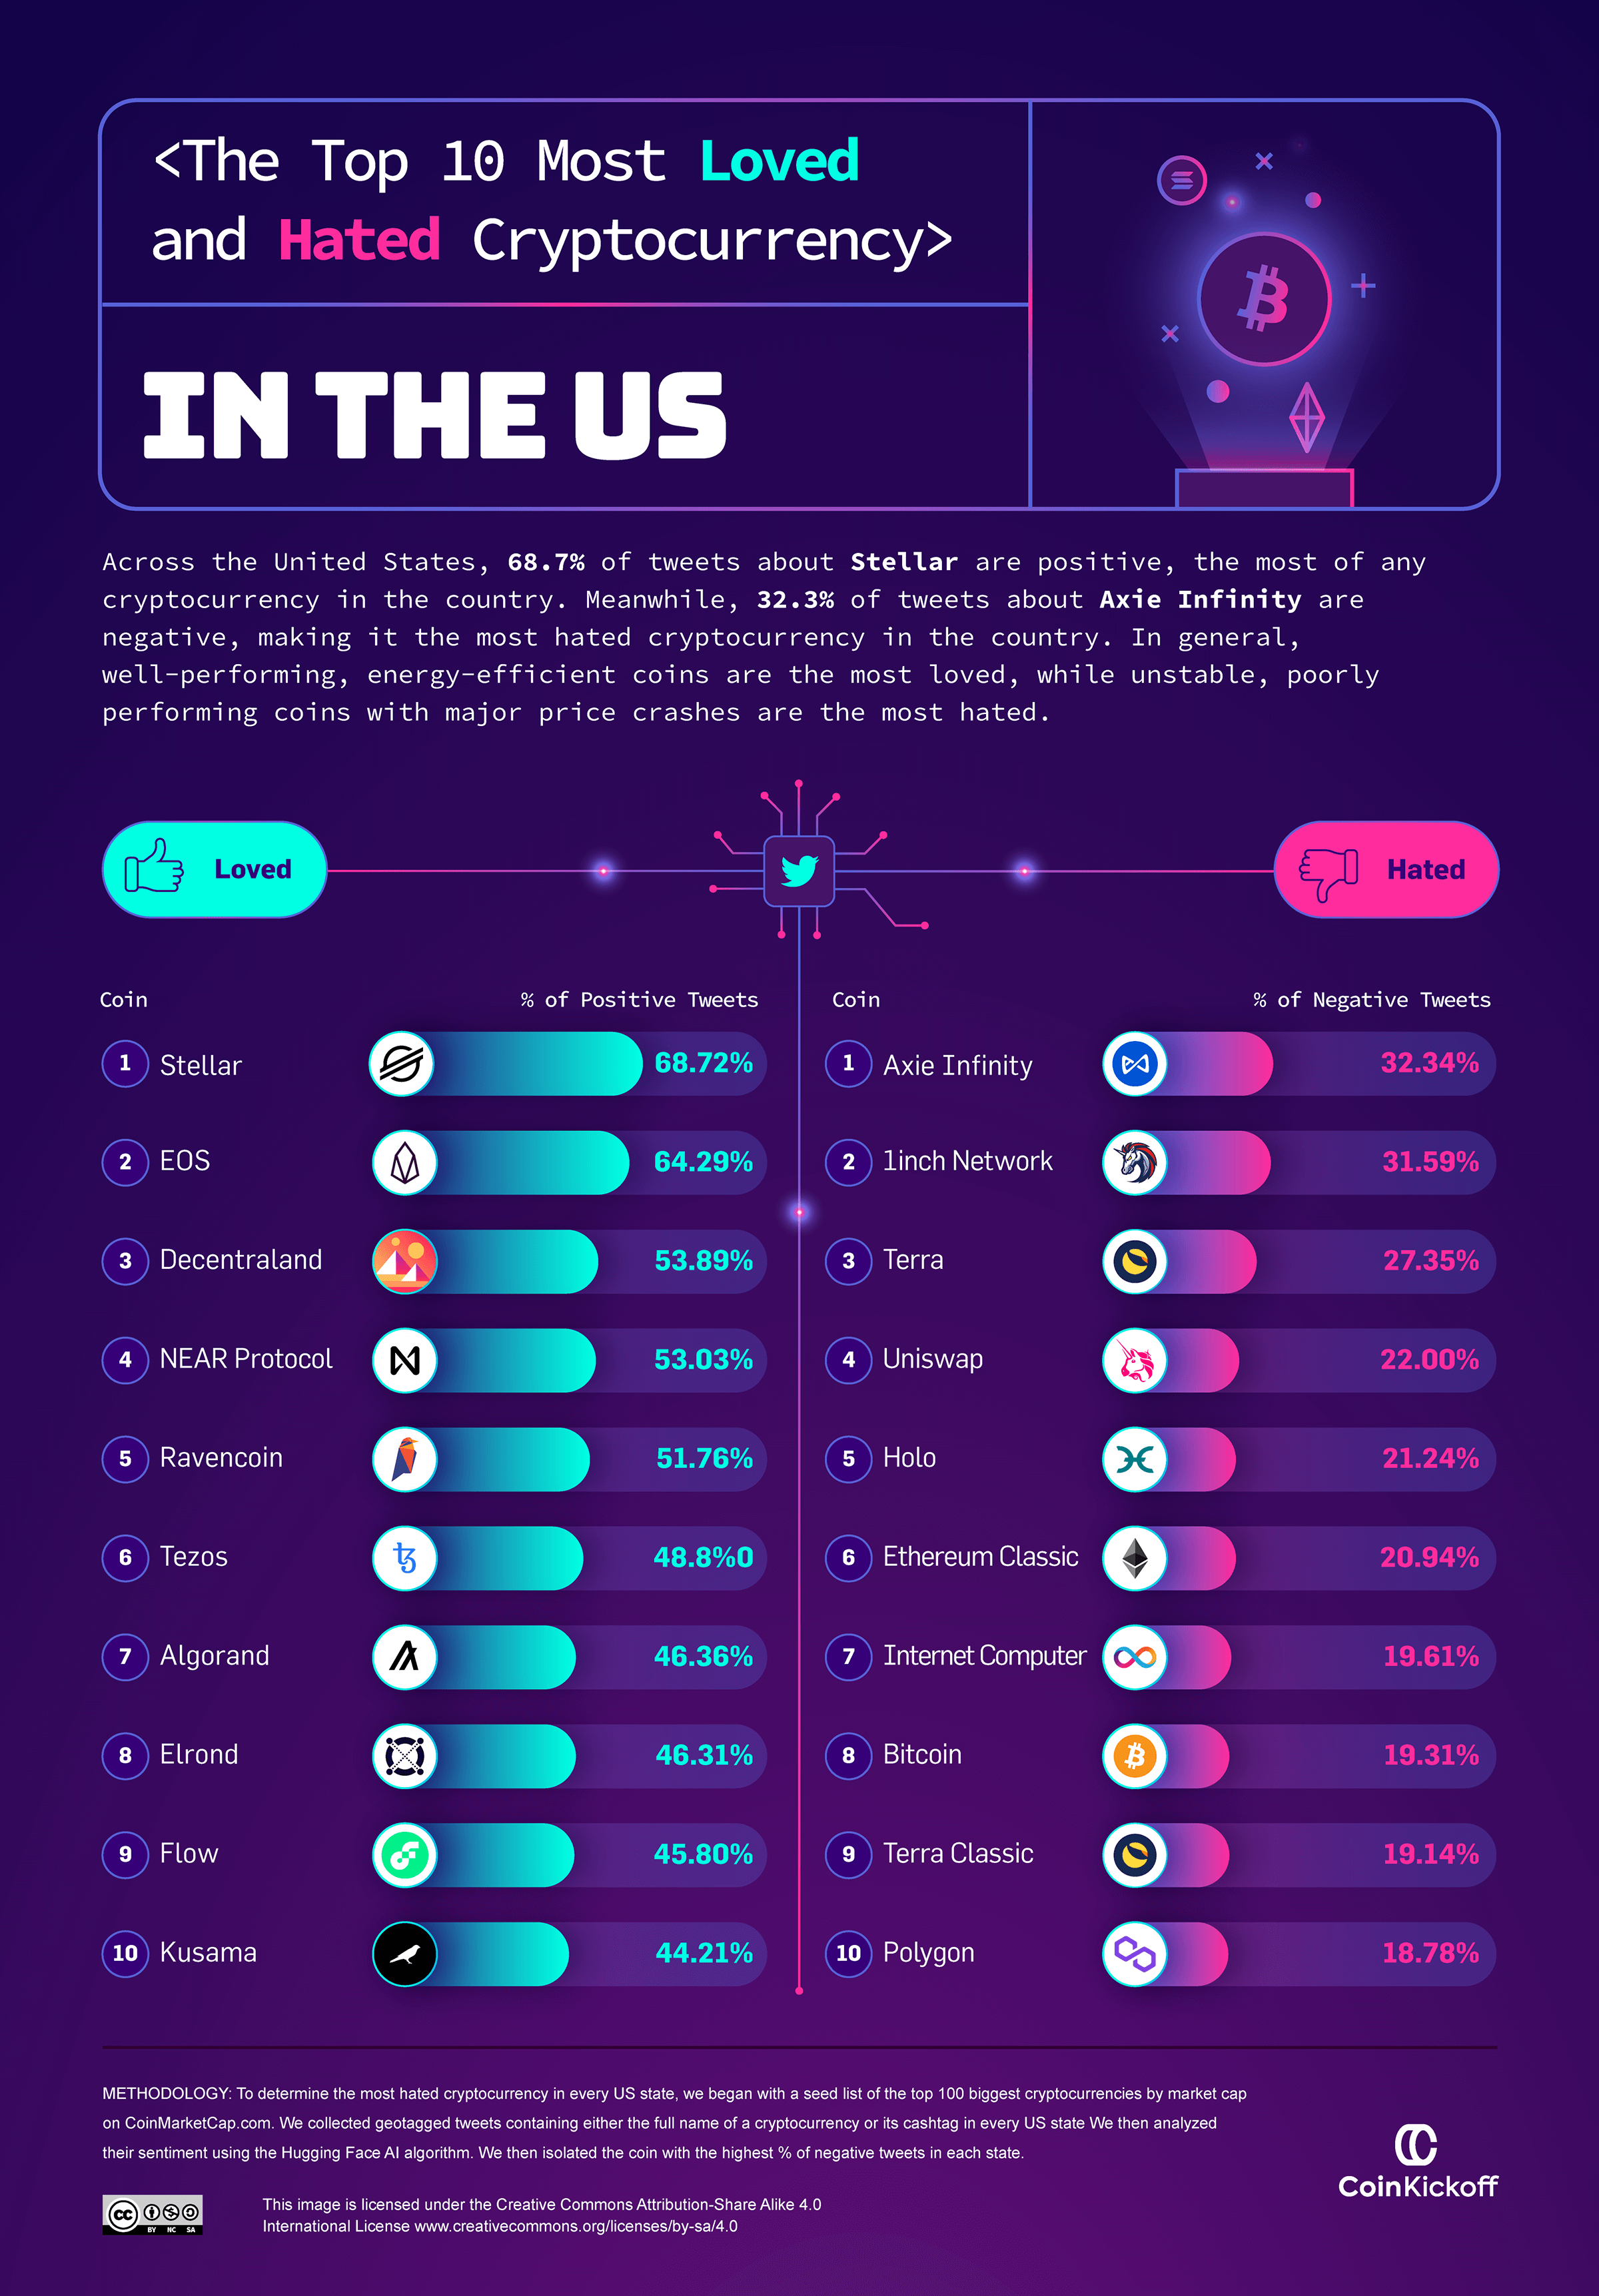 06_Top-10-Most-Loved-and-Hated-Cryptocurrency-in-the-US